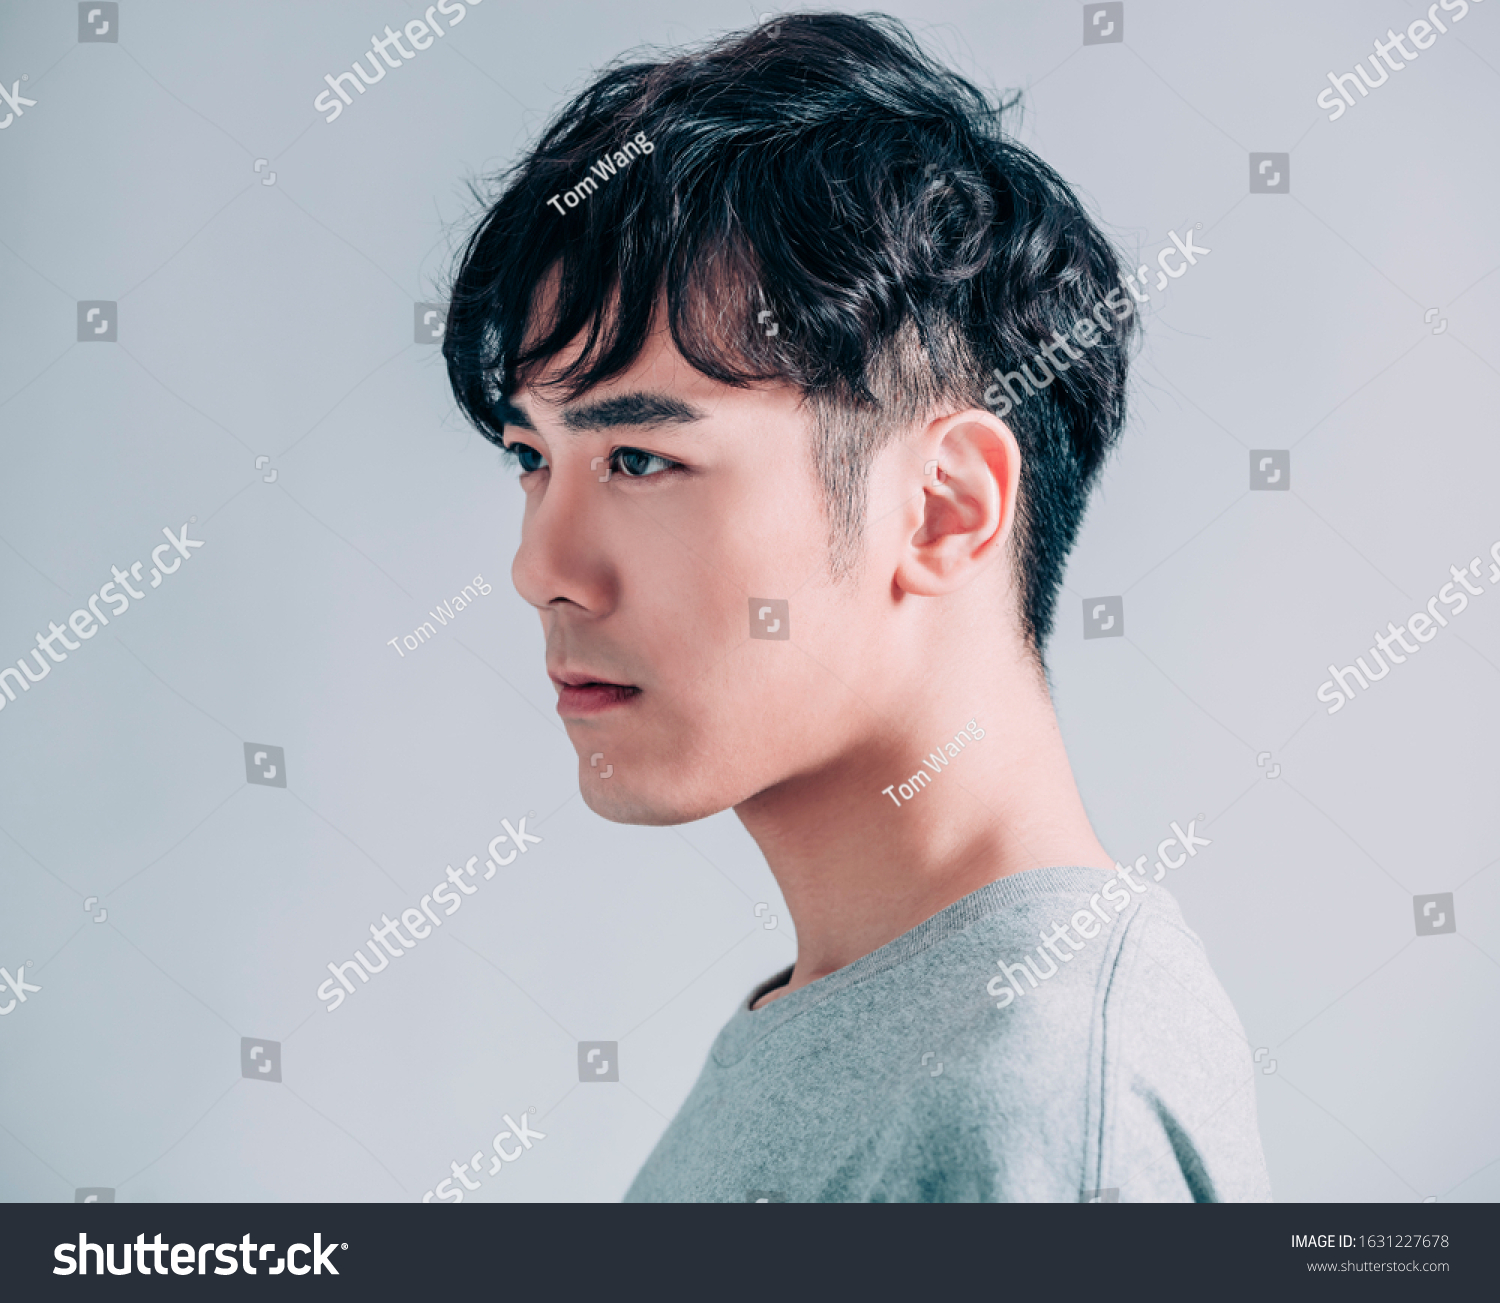 side view of young smiling handsome man isolated on gray background #1631227678